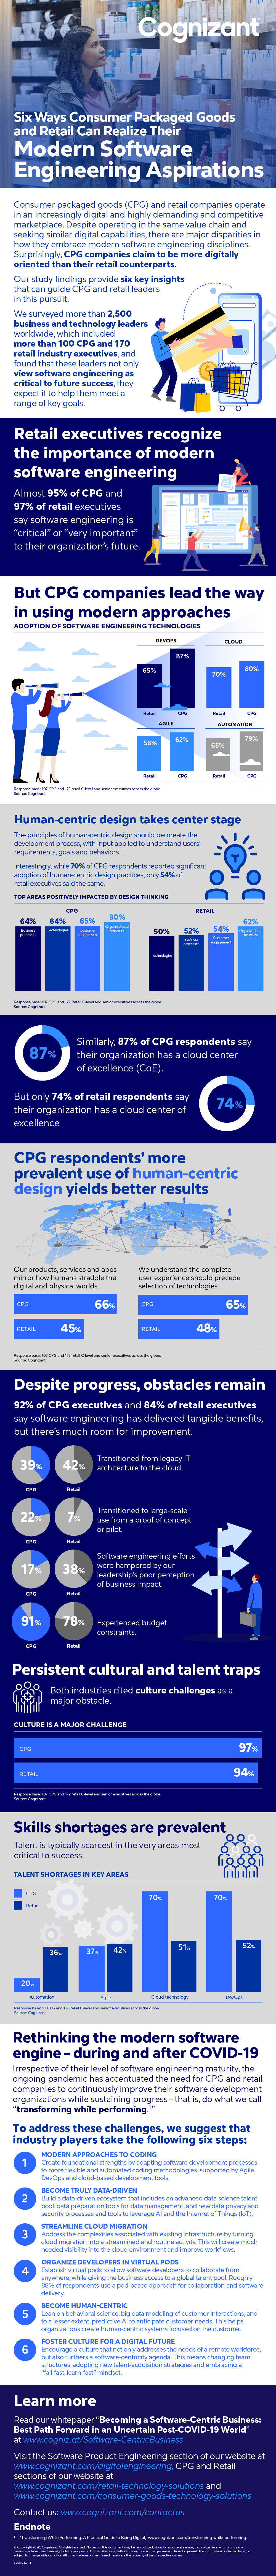 Retail & CPG_On Different Paths To Better Software Experiences IG